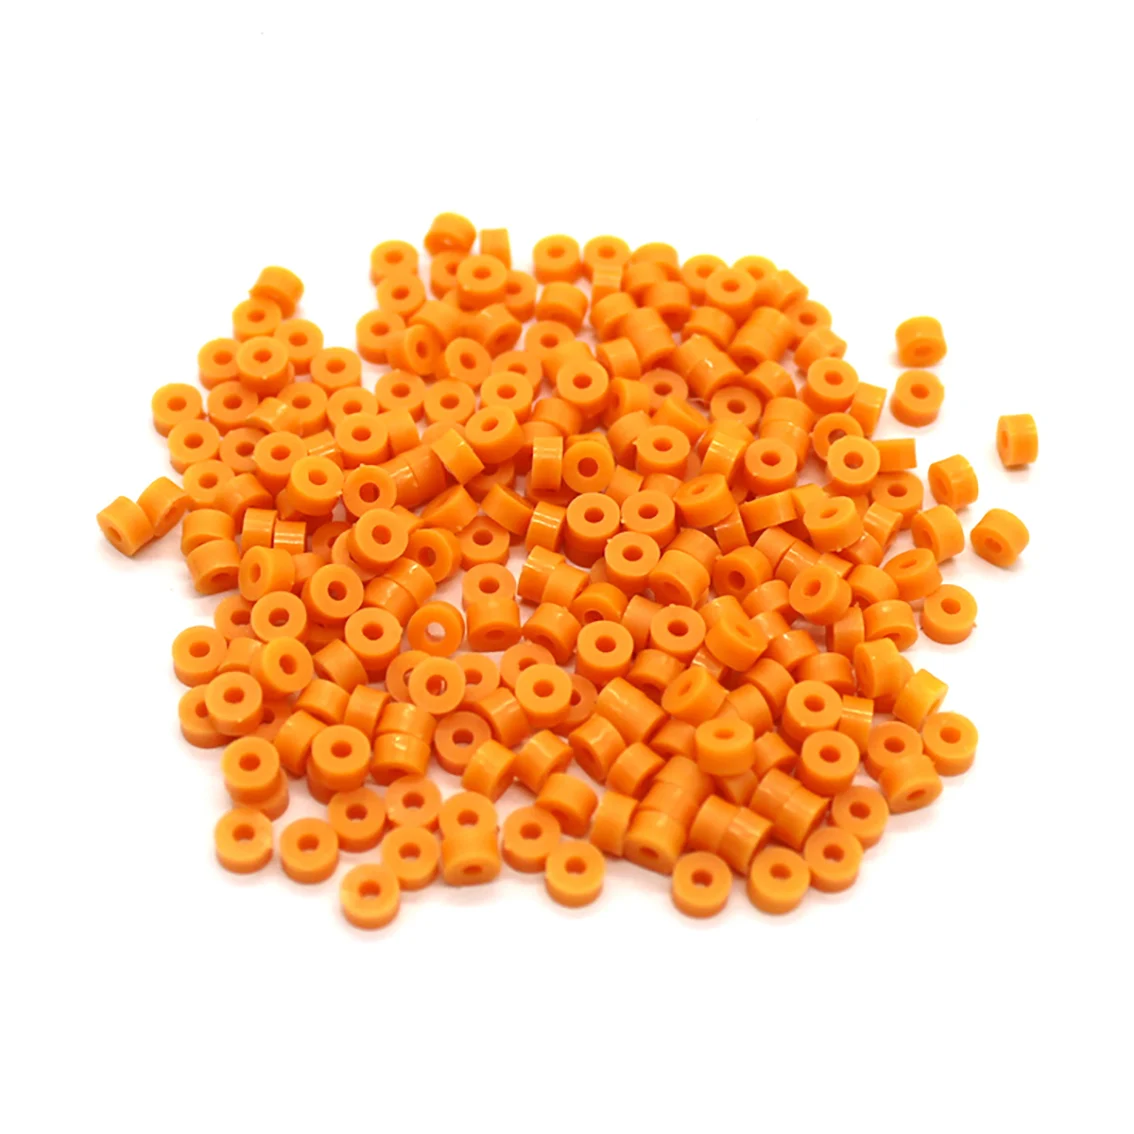 80pcs ABS Plastic Shaft Sleeve 2mm Fixed Gasket Limit Sleeve Washer DIY Experiment Model Material Accessories